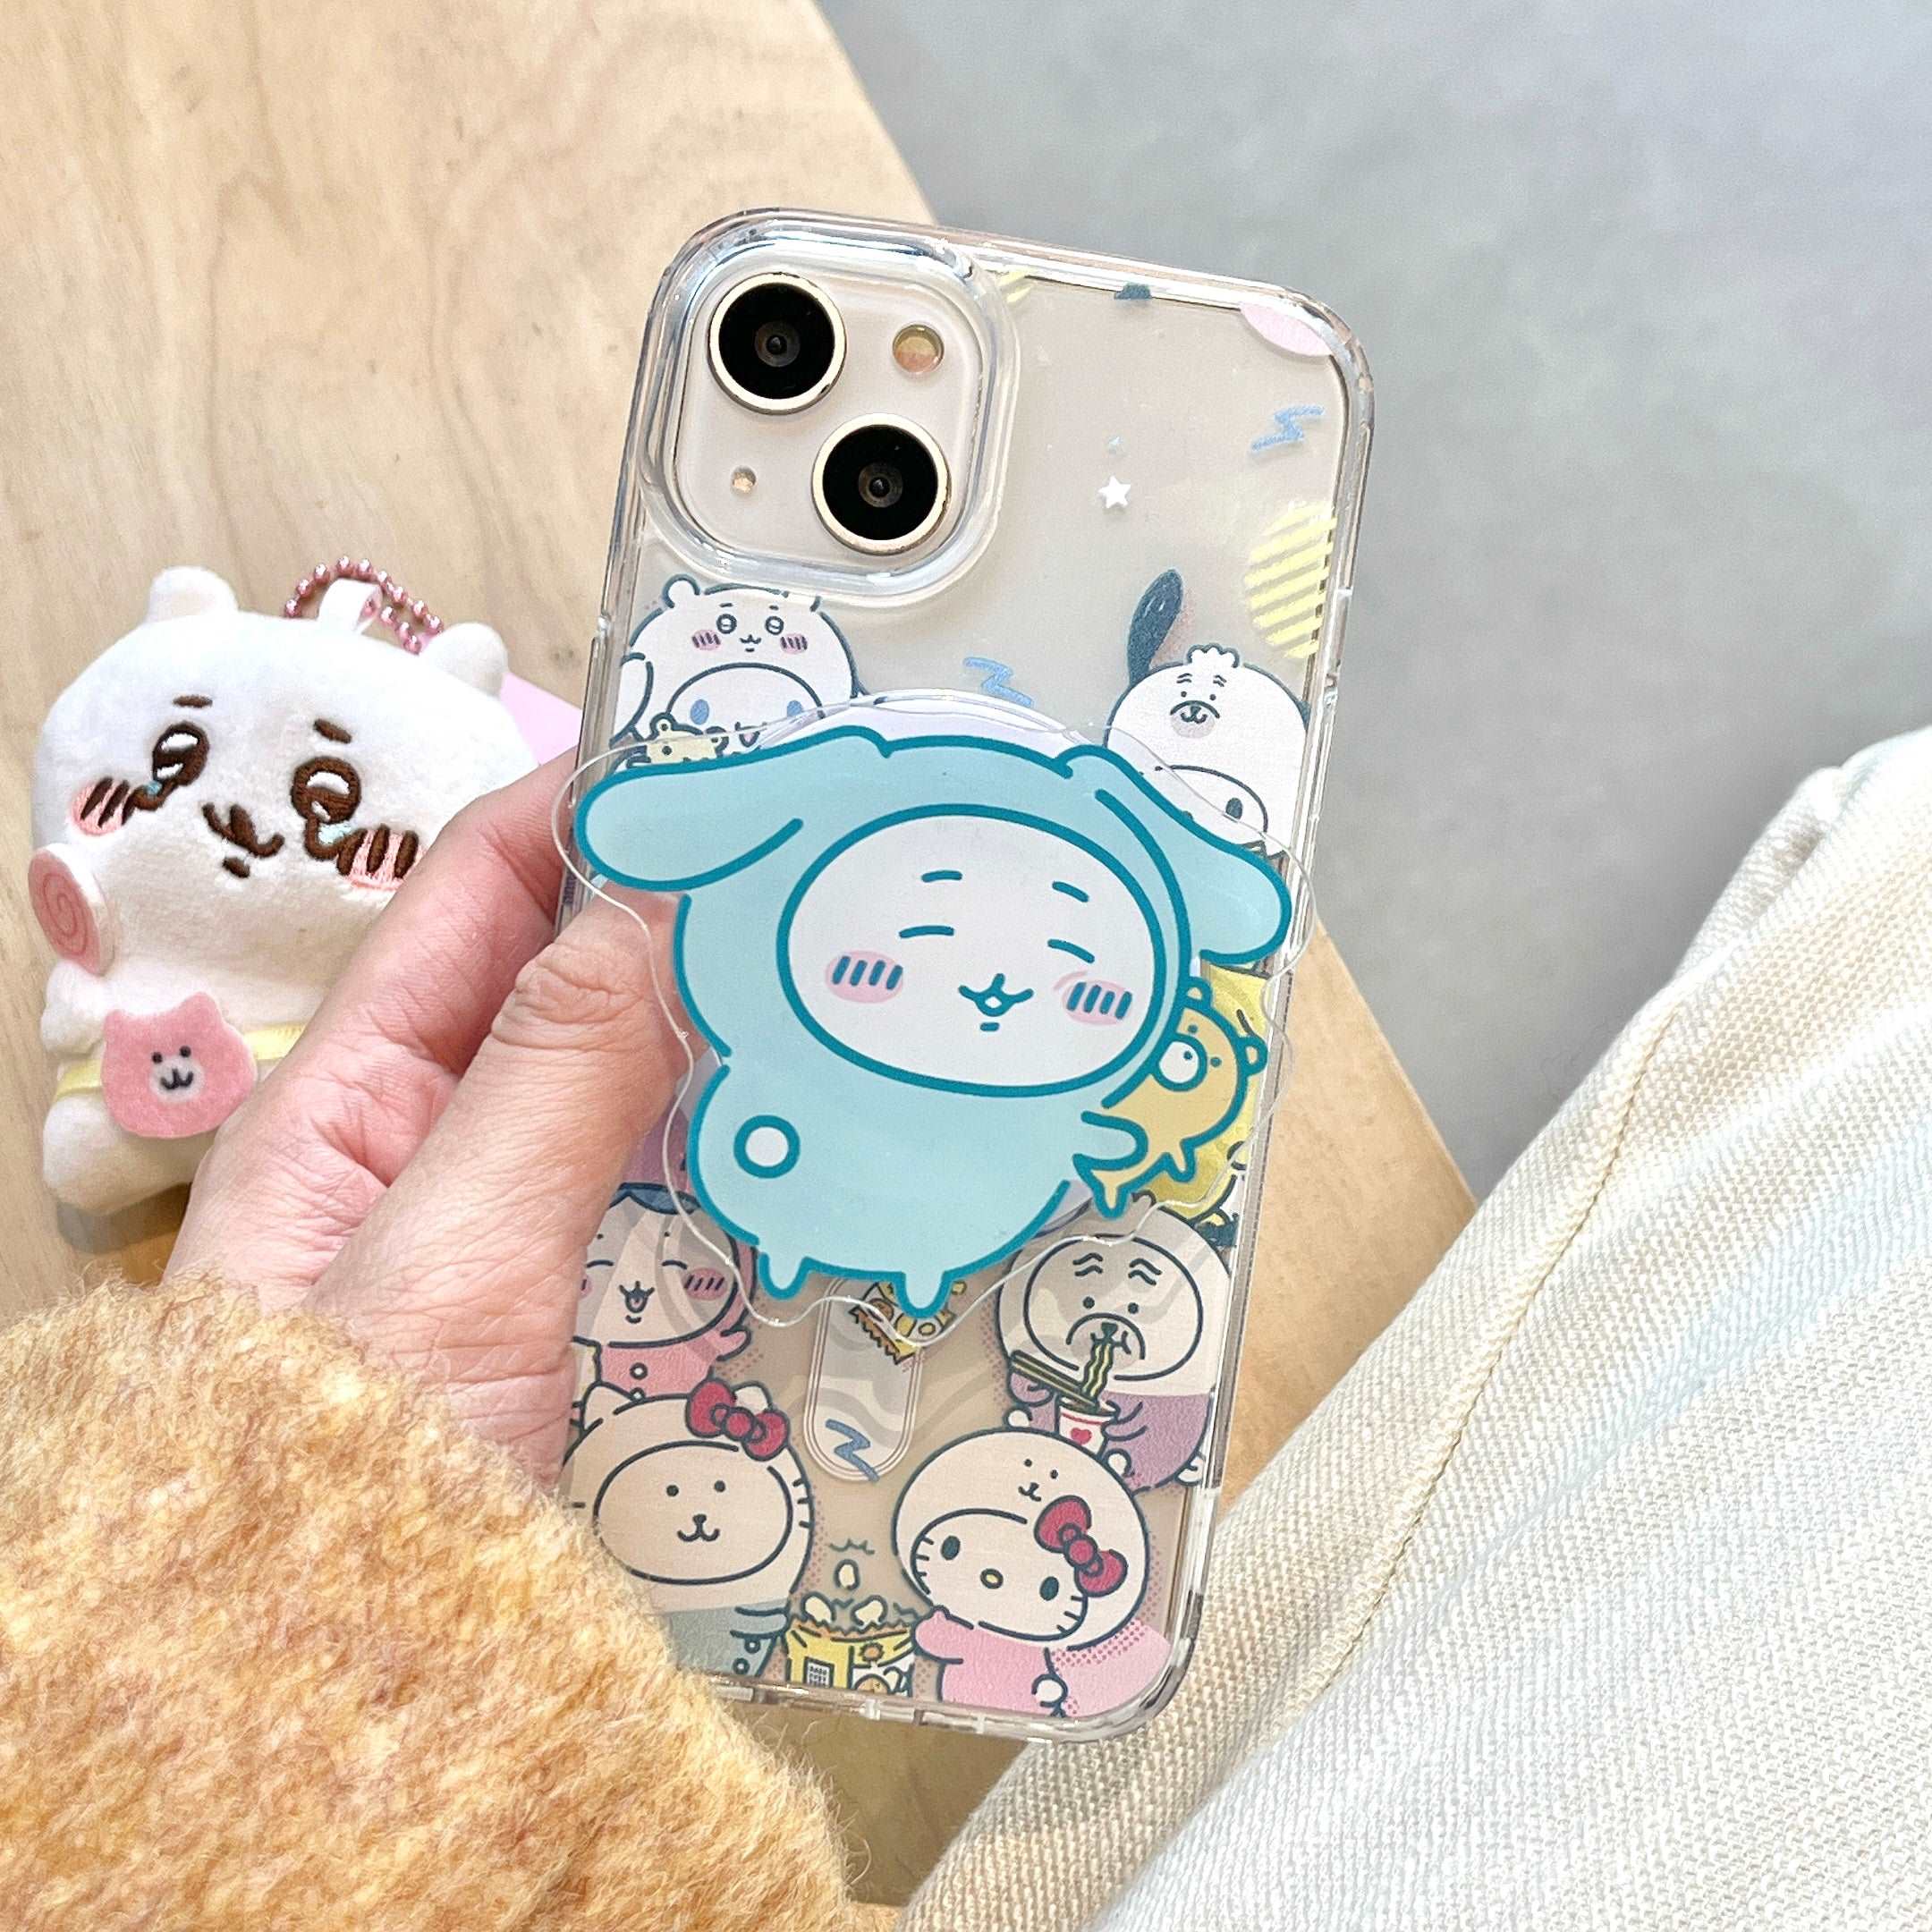 Chiikawa Japanese Style iPhone Case for iPhone 11-15 Pro Max, Magnetic Phone Case With Phone Holder for Anime Lovers, Cute Phone Case for Women Girls, Y2K Fashion Item for Gen Z